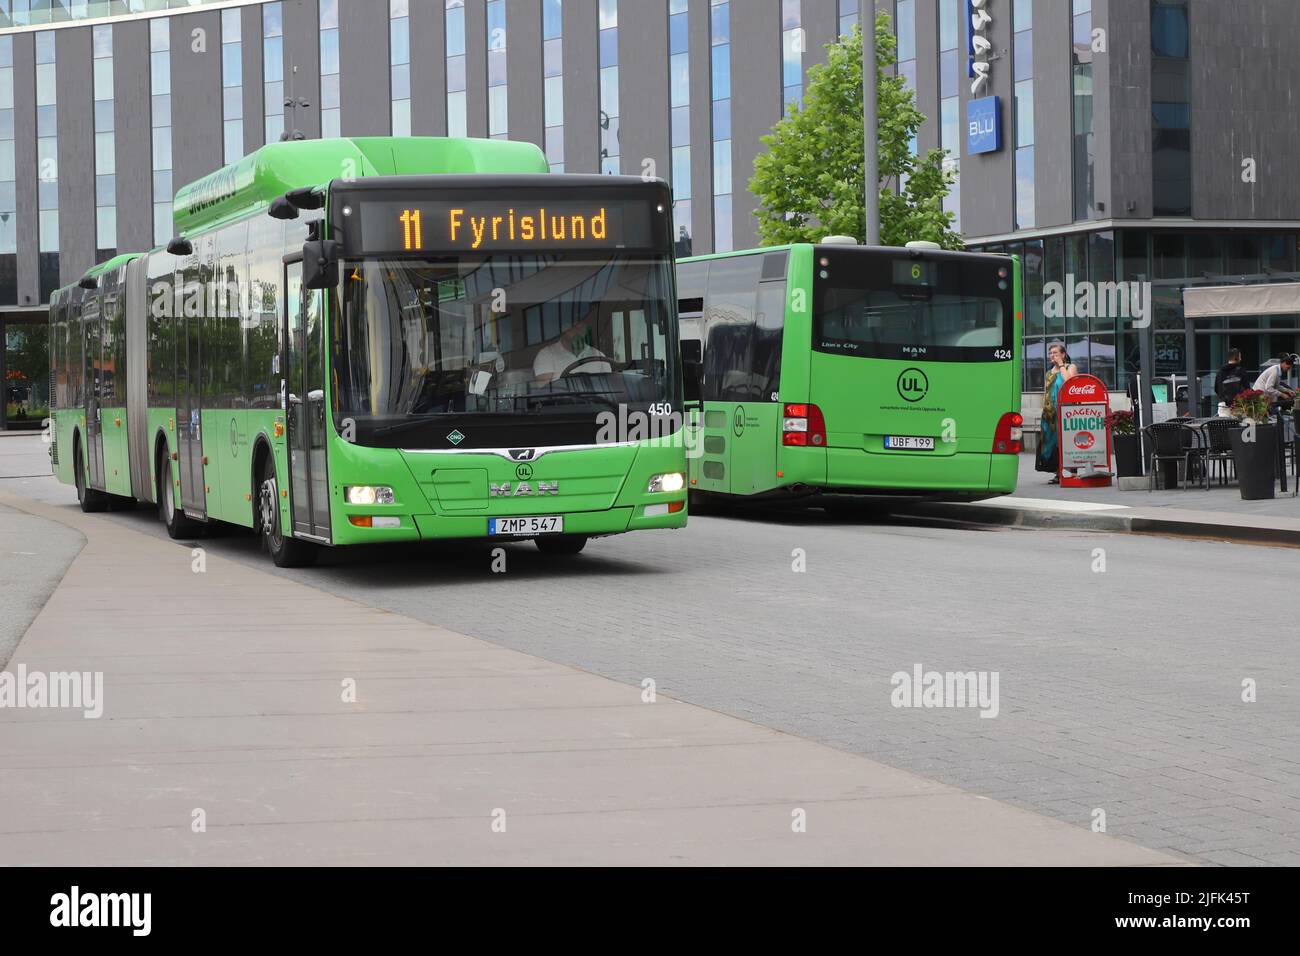 Uppsala, Sweden - July 2, 2022: Green bus in service onb line 11 for the UL public transportation near the central station. Stock Photo